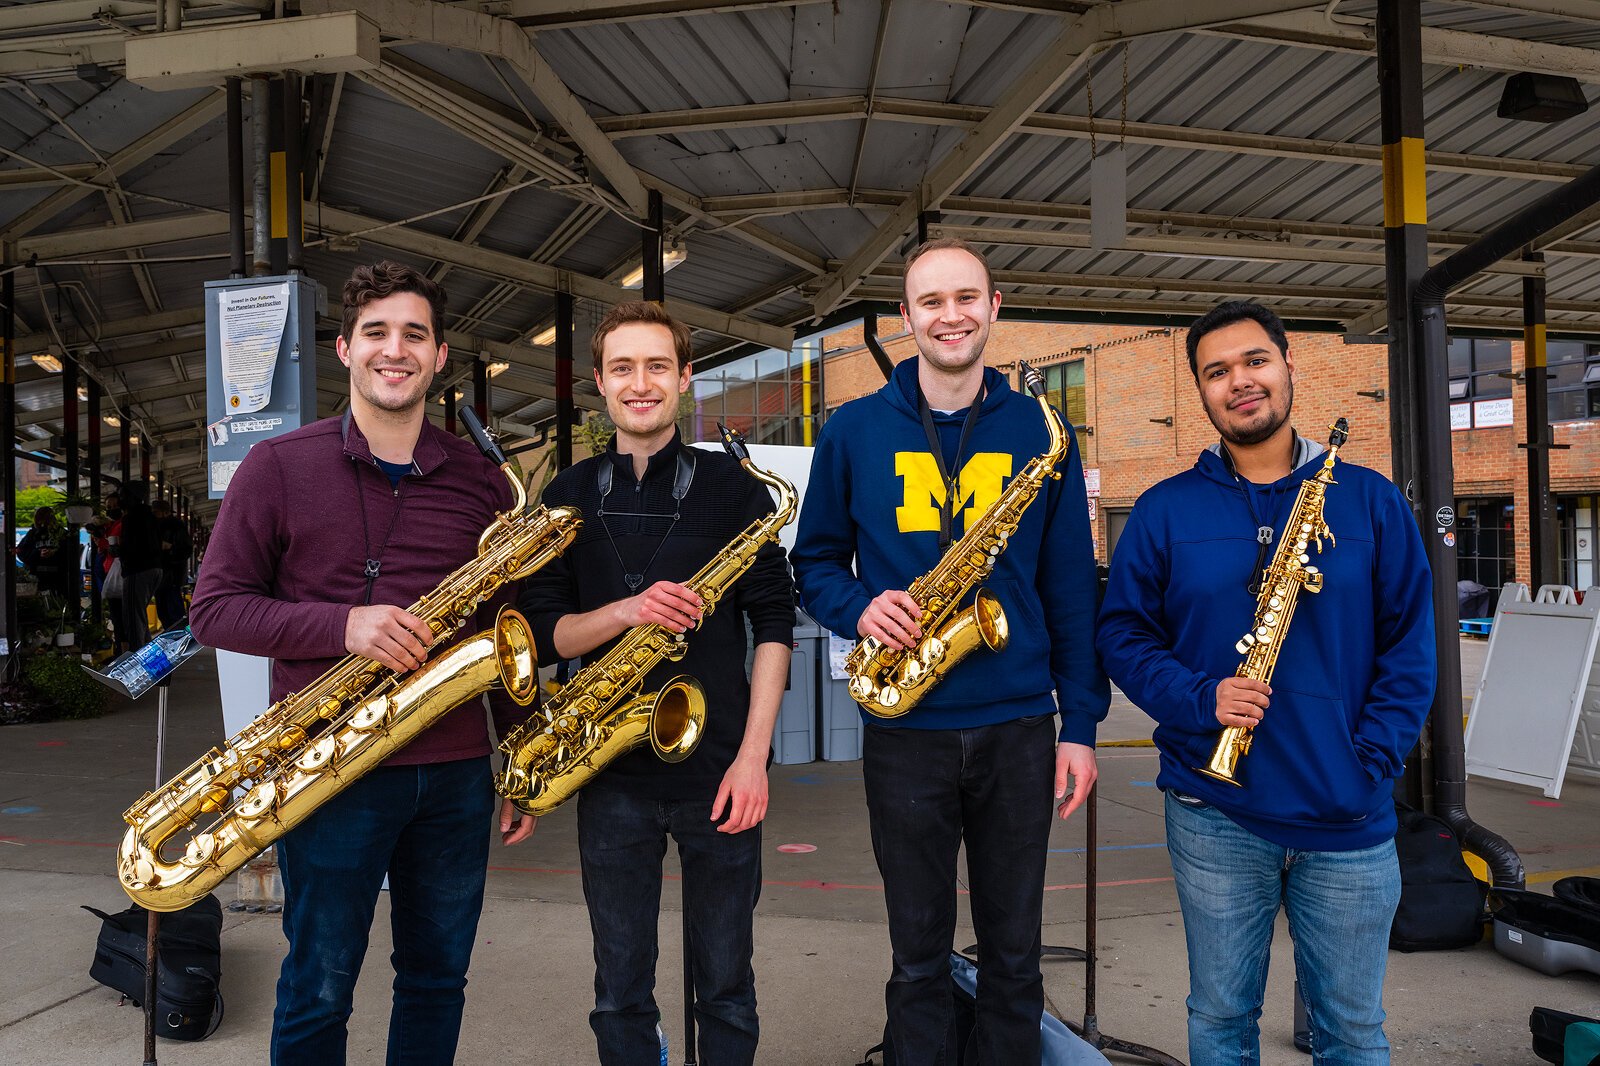 Matthew Koester, Andrew MacRossie, Walt Puyear, and Salvador Flores during an Ann Arbor Camerata performance at Kerrytown Farmers Market.